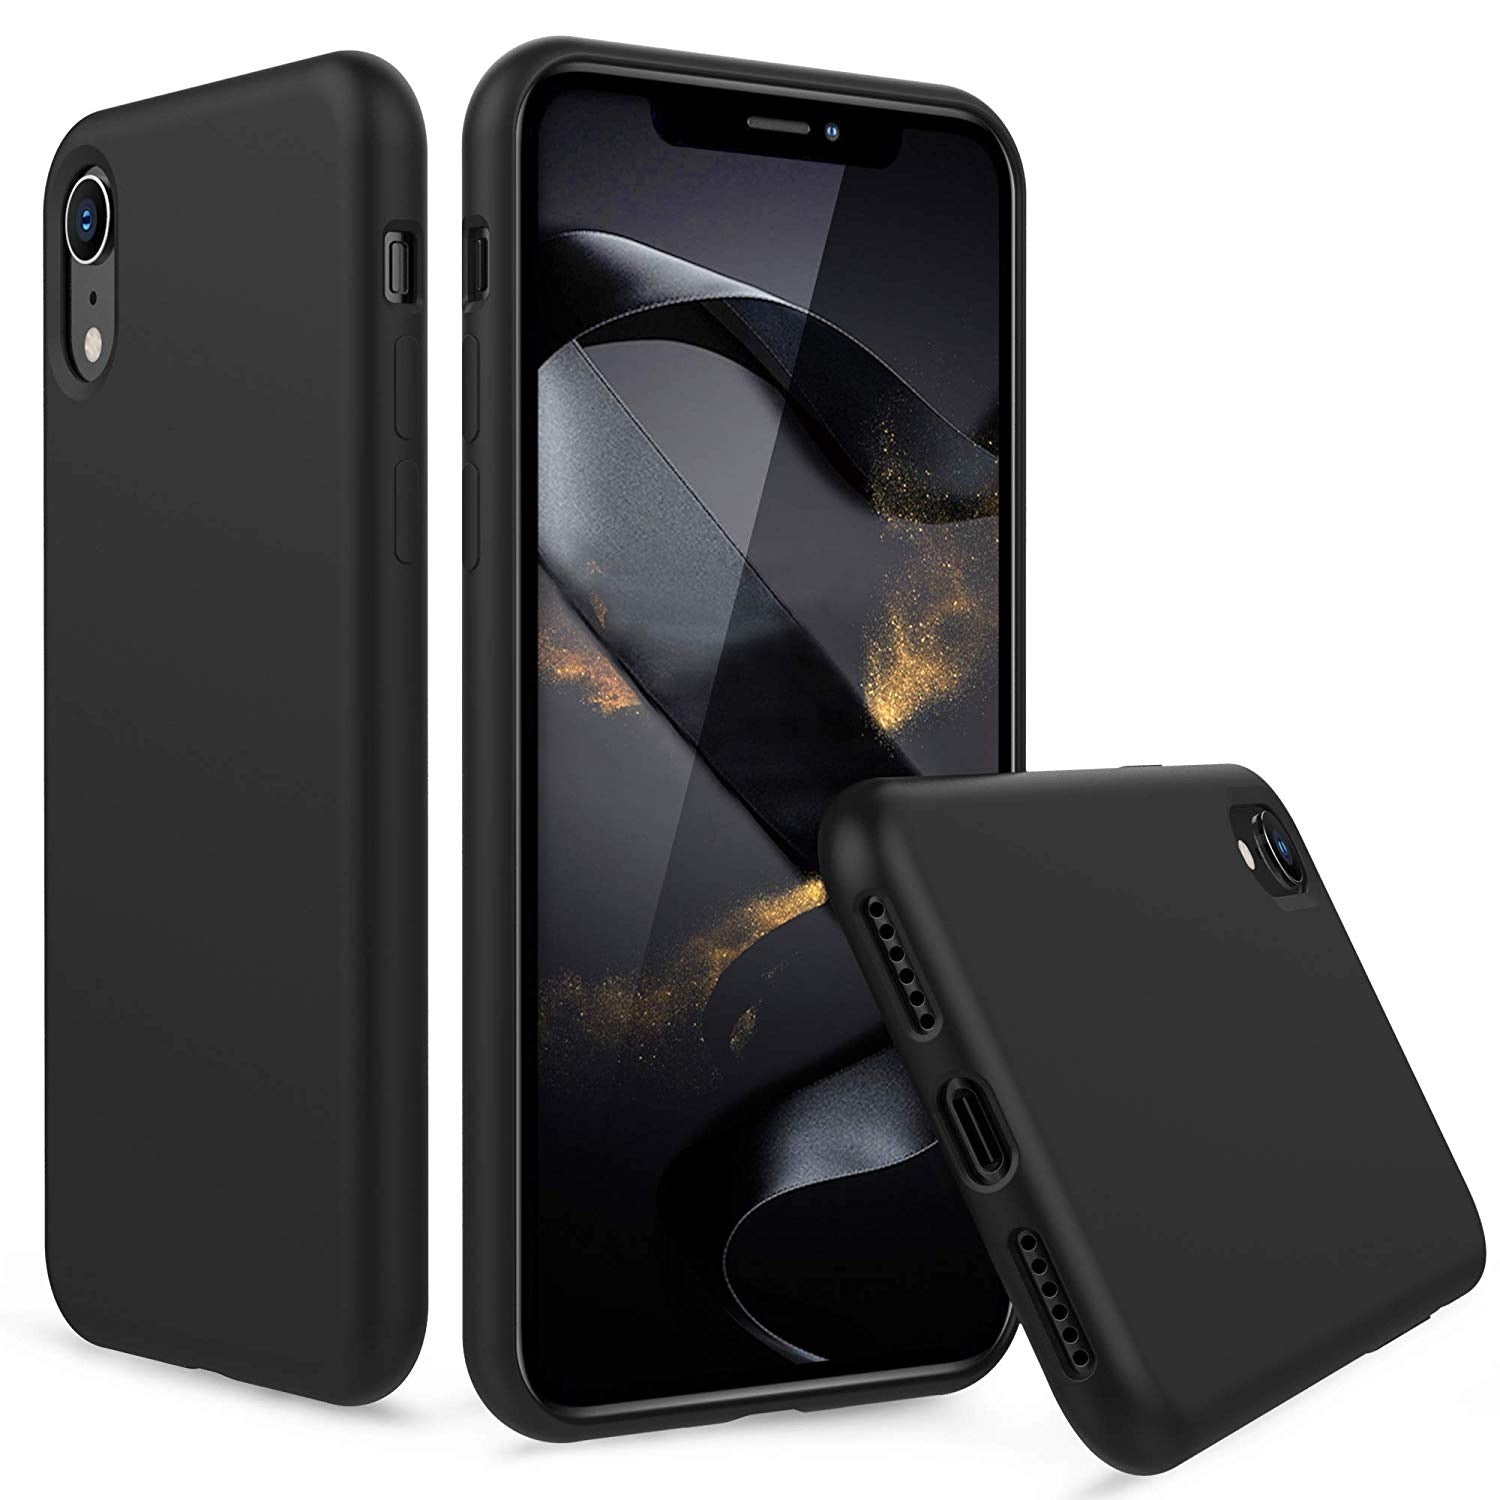 iPhone 8 Thin Soft Silicone Case Cover